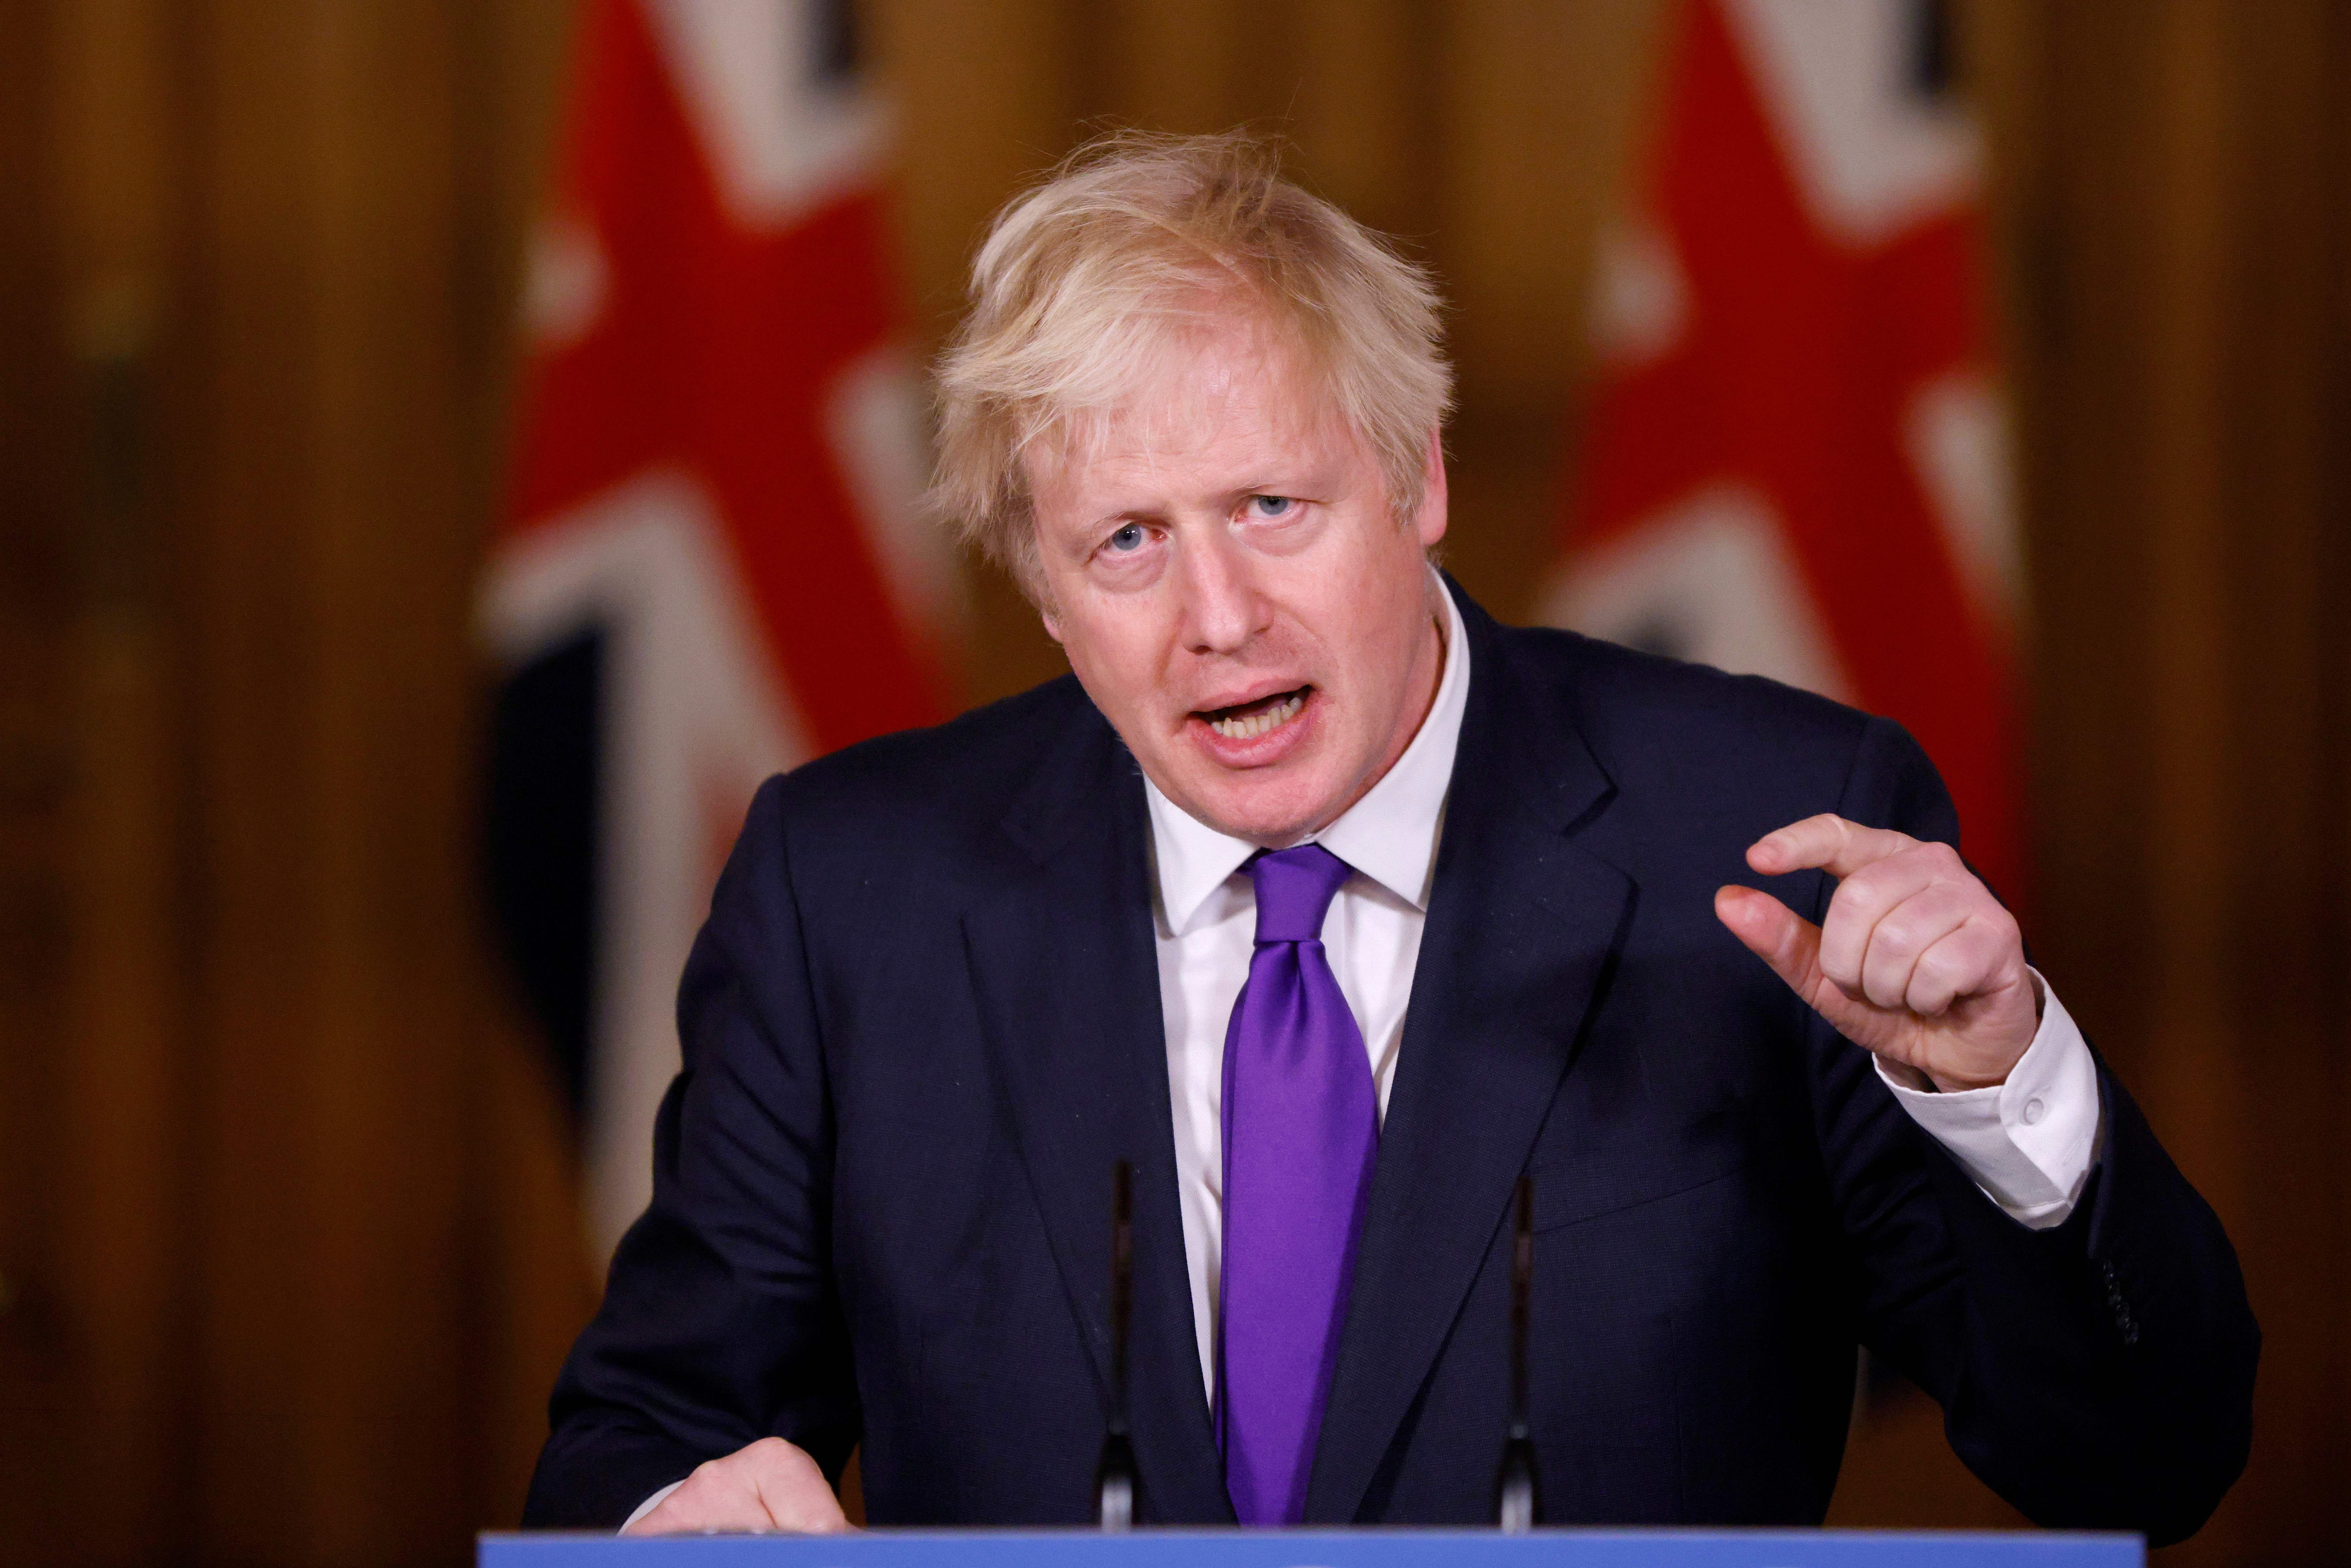 Britain's Prime Minister Boris Johnson speaks during a virtual press conference inside 10 Downing Street in central London on December 2